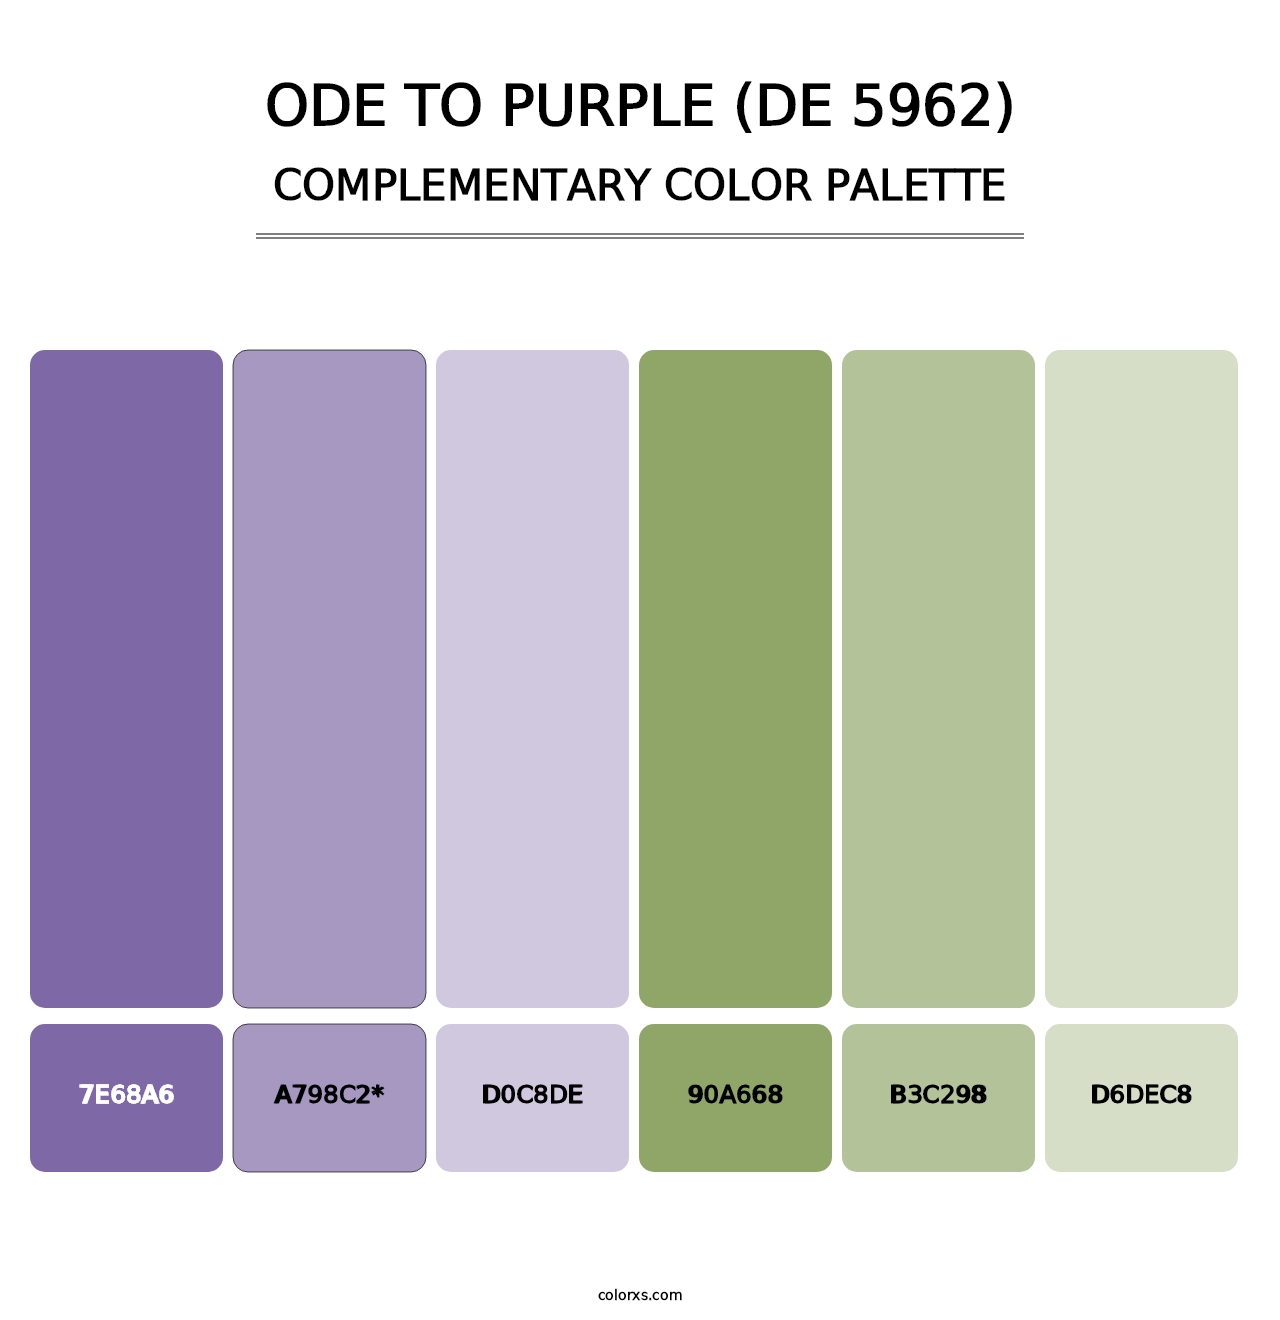 Ode to Purple (DE 5962) - Complementary Color Palette